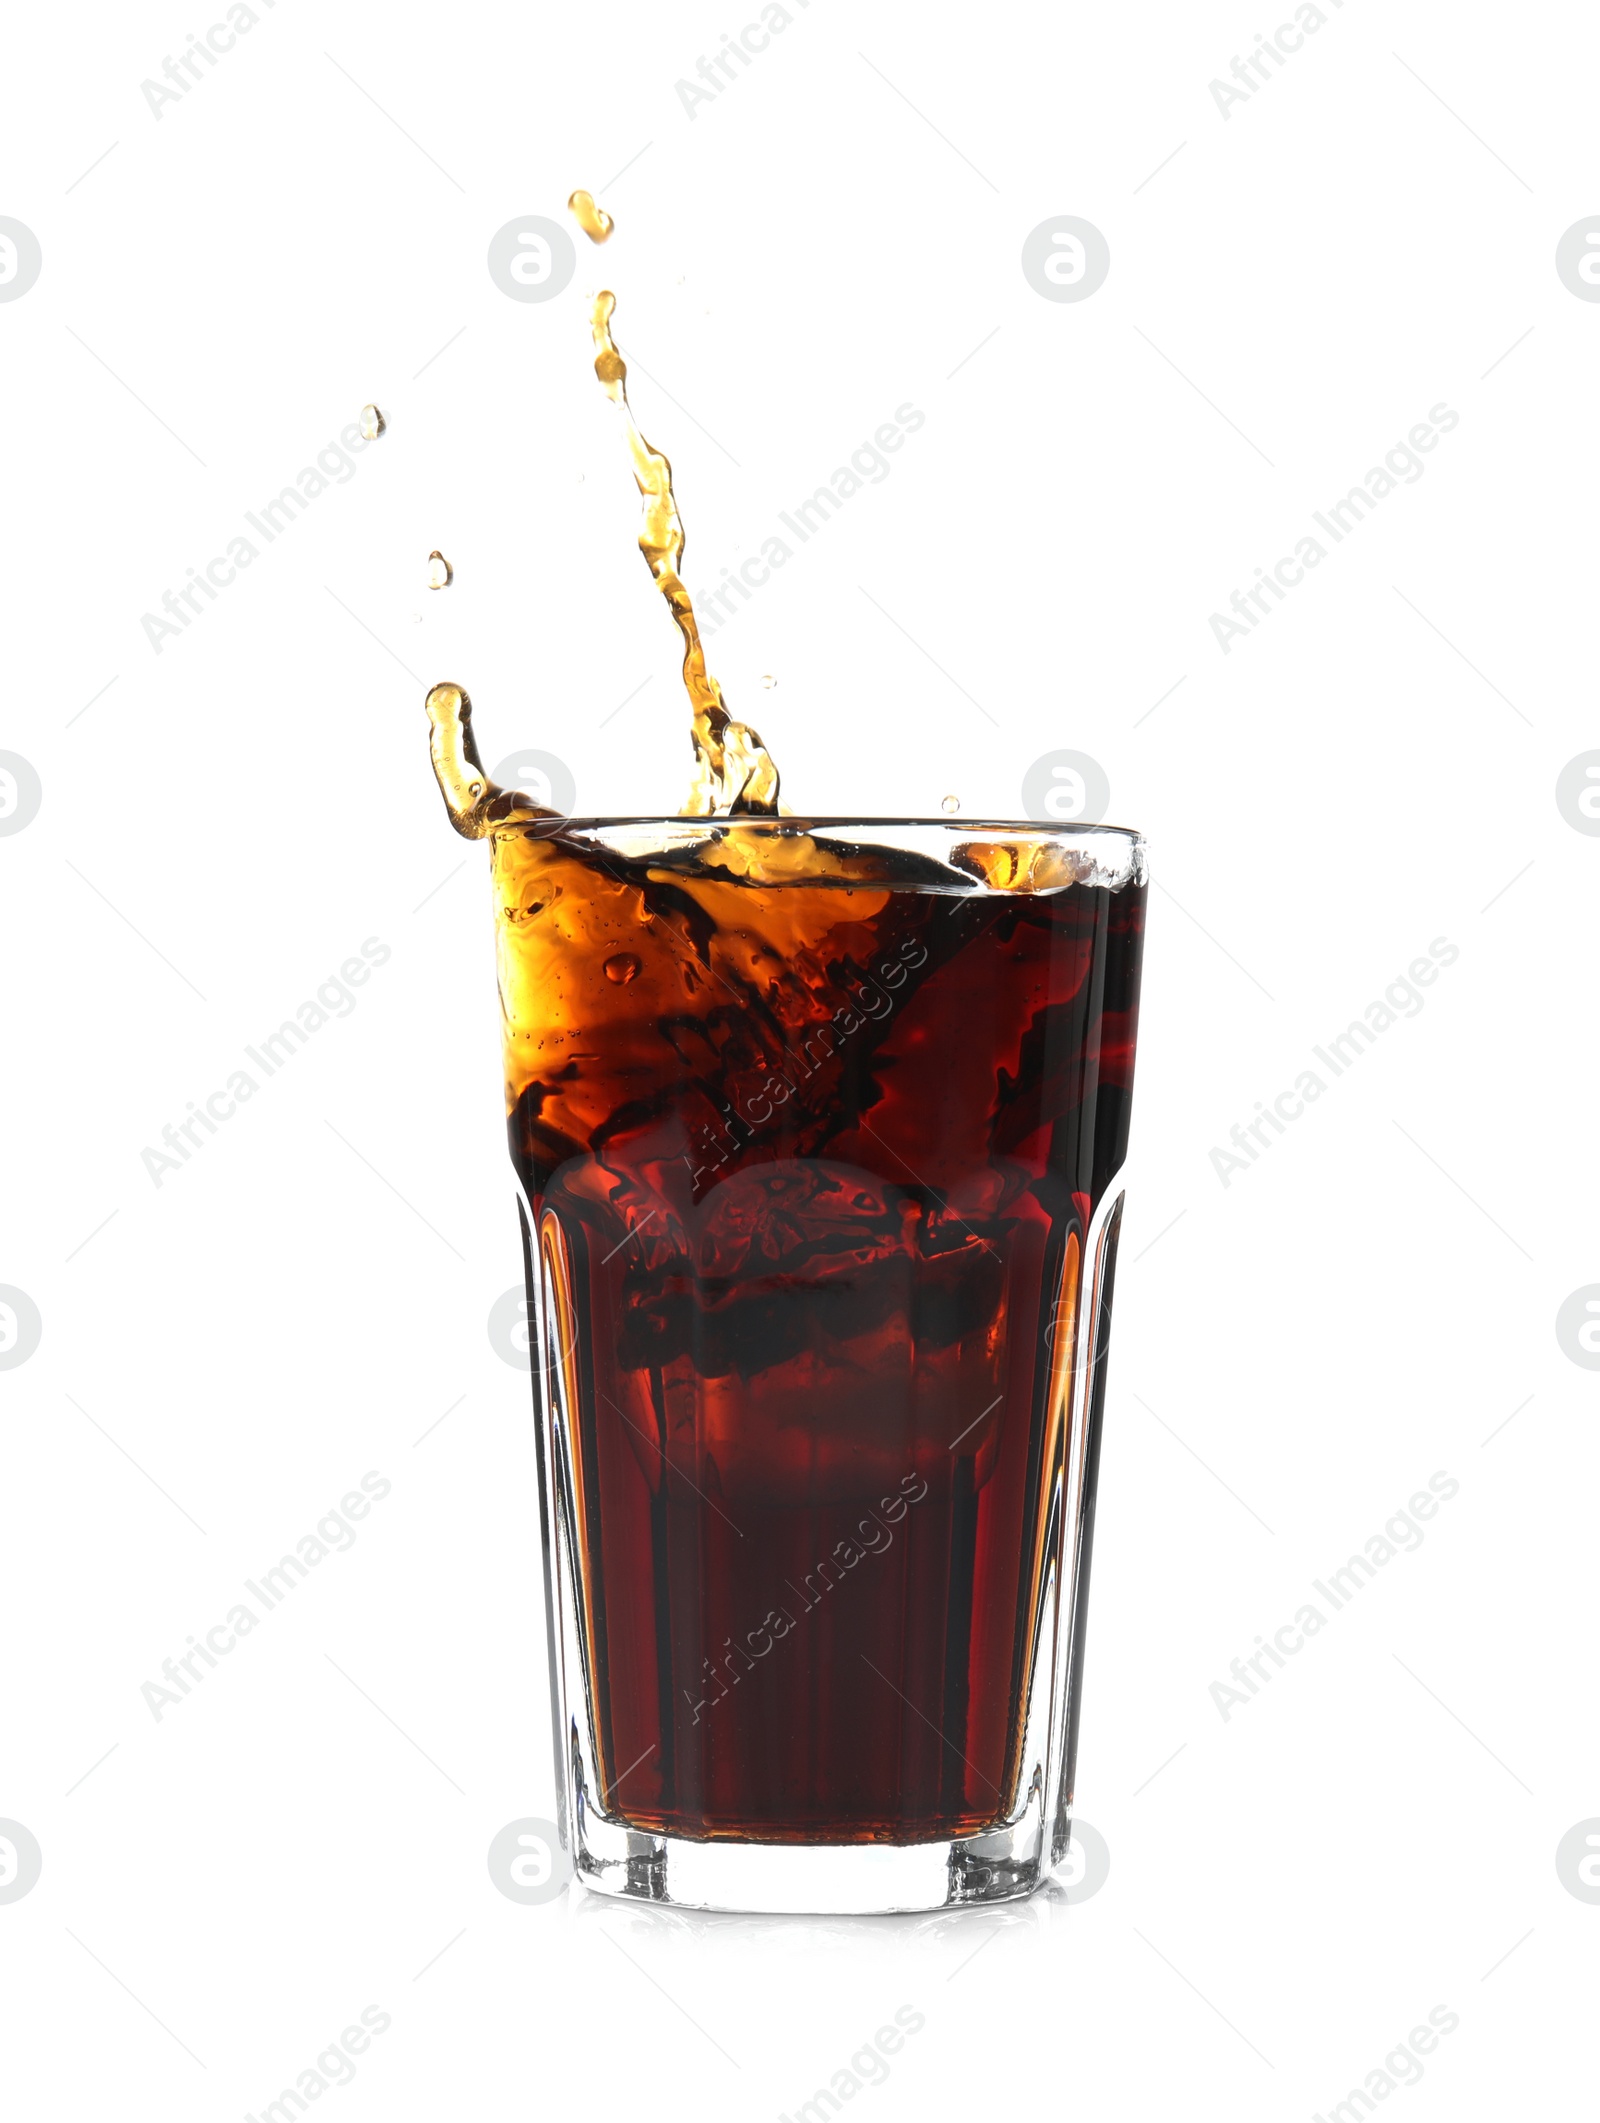 Photo of Splash of cola in glass on white background